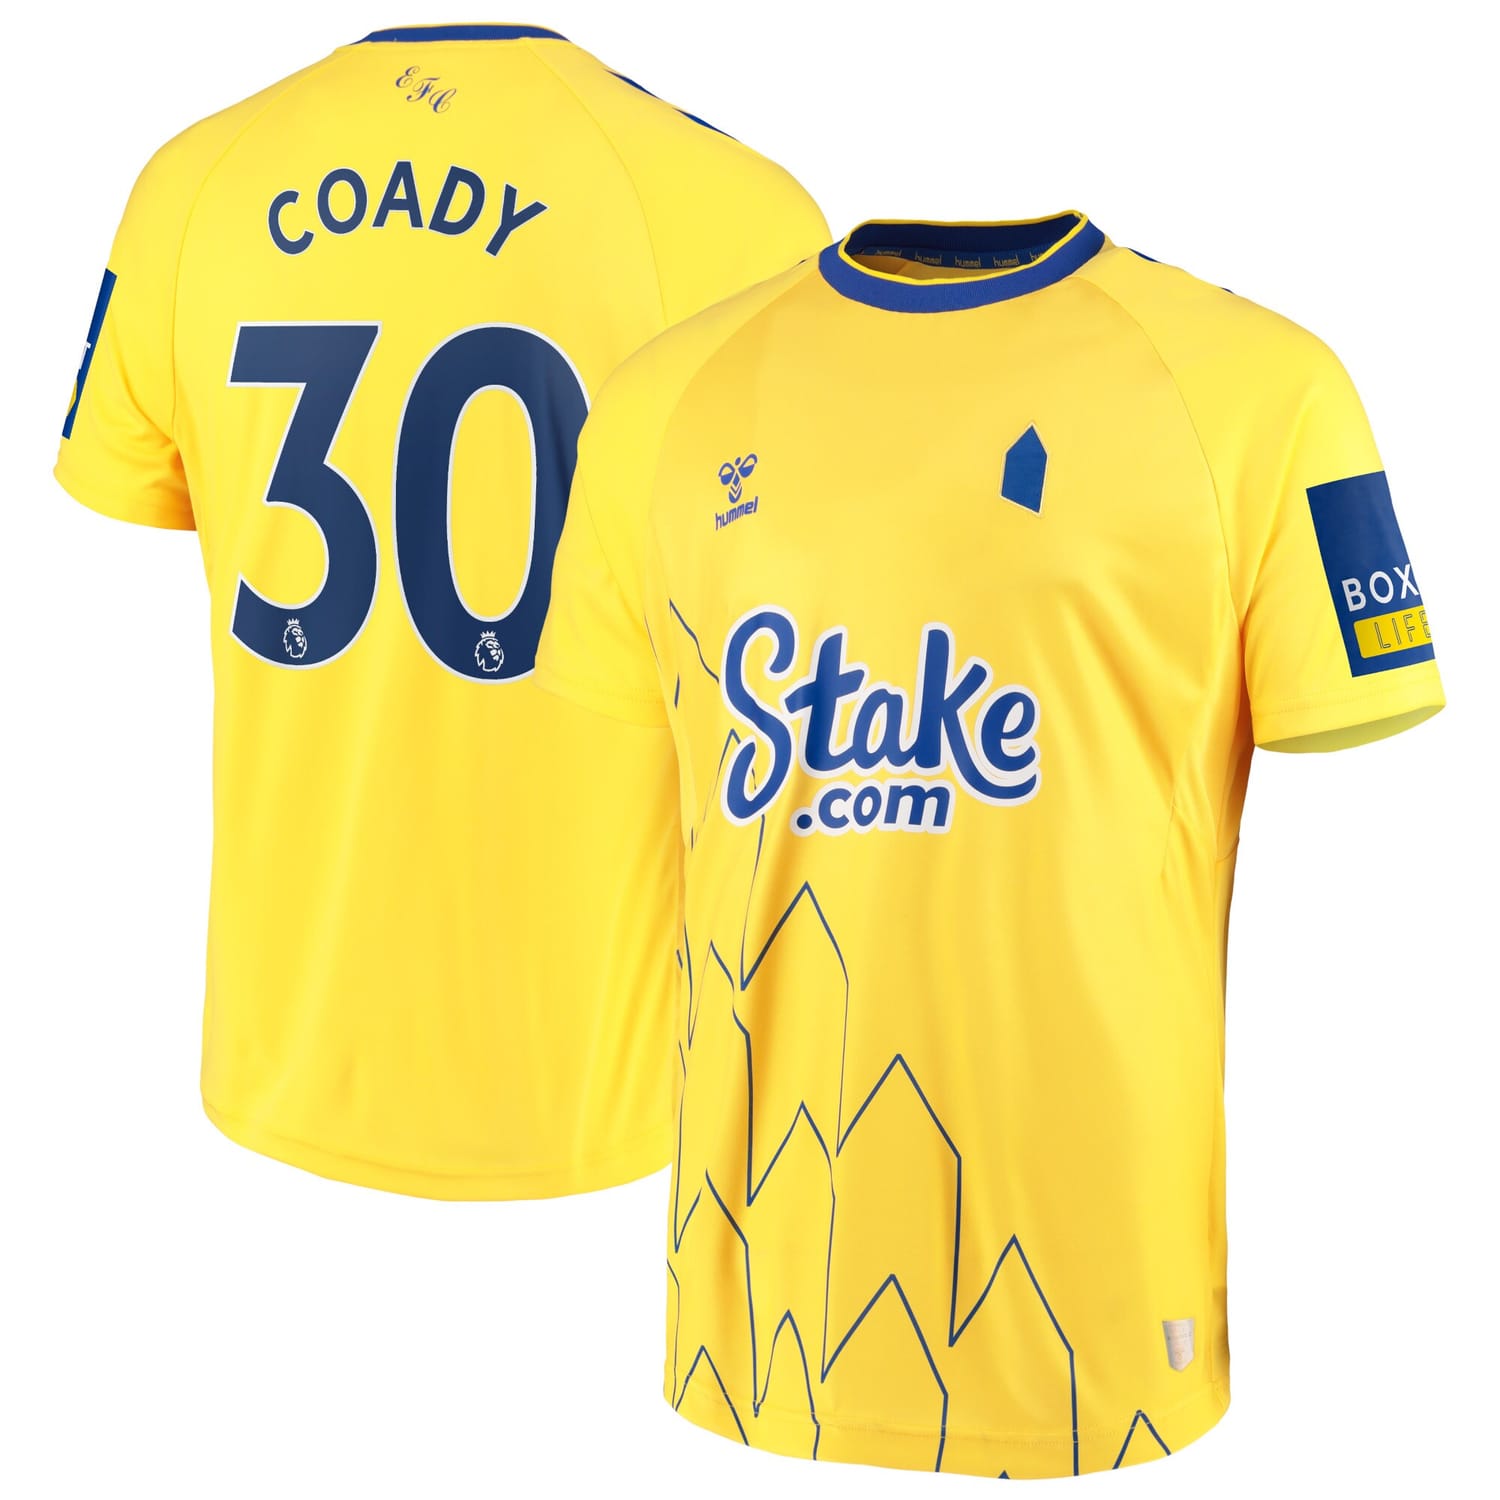 Premier League Everton Third Jersey Shirt 2022-23 player Conor Coady 30 printing for Men